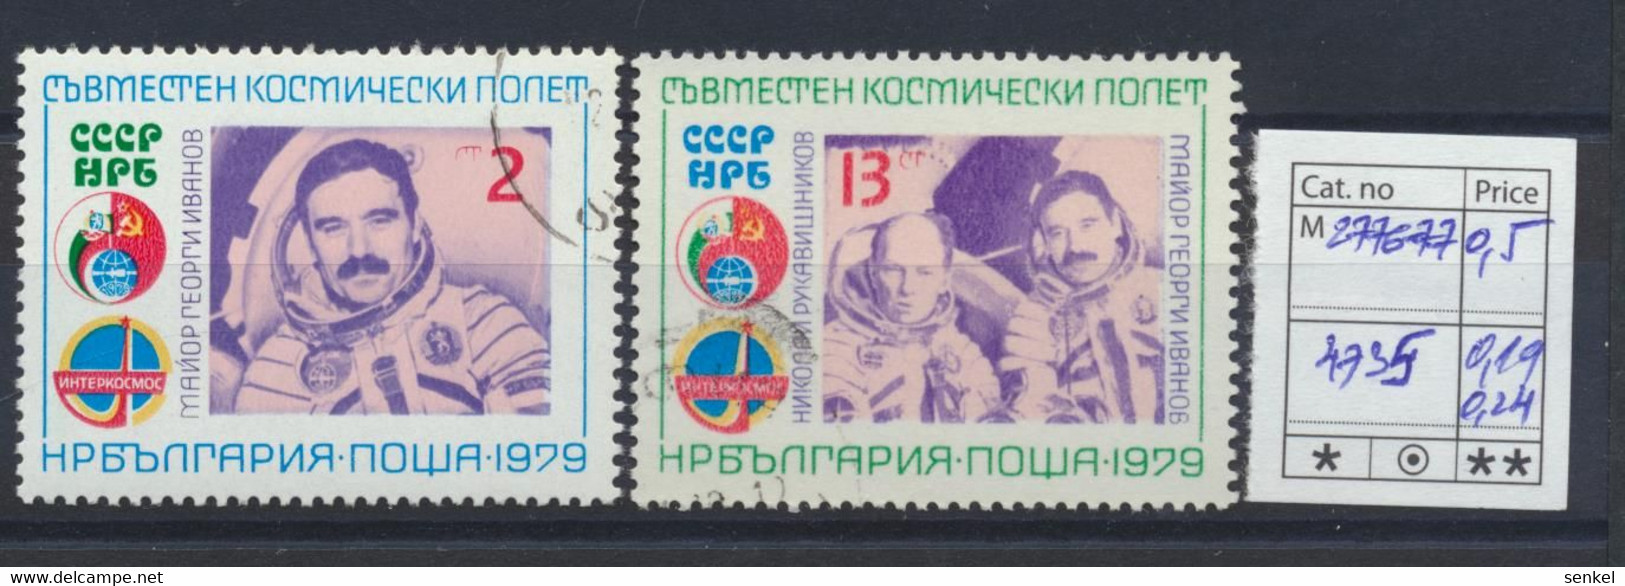 4722 - 4742 Bulgaria 1979 different stamps exhibition cosmos post humour Gabrovo art Dürer towers